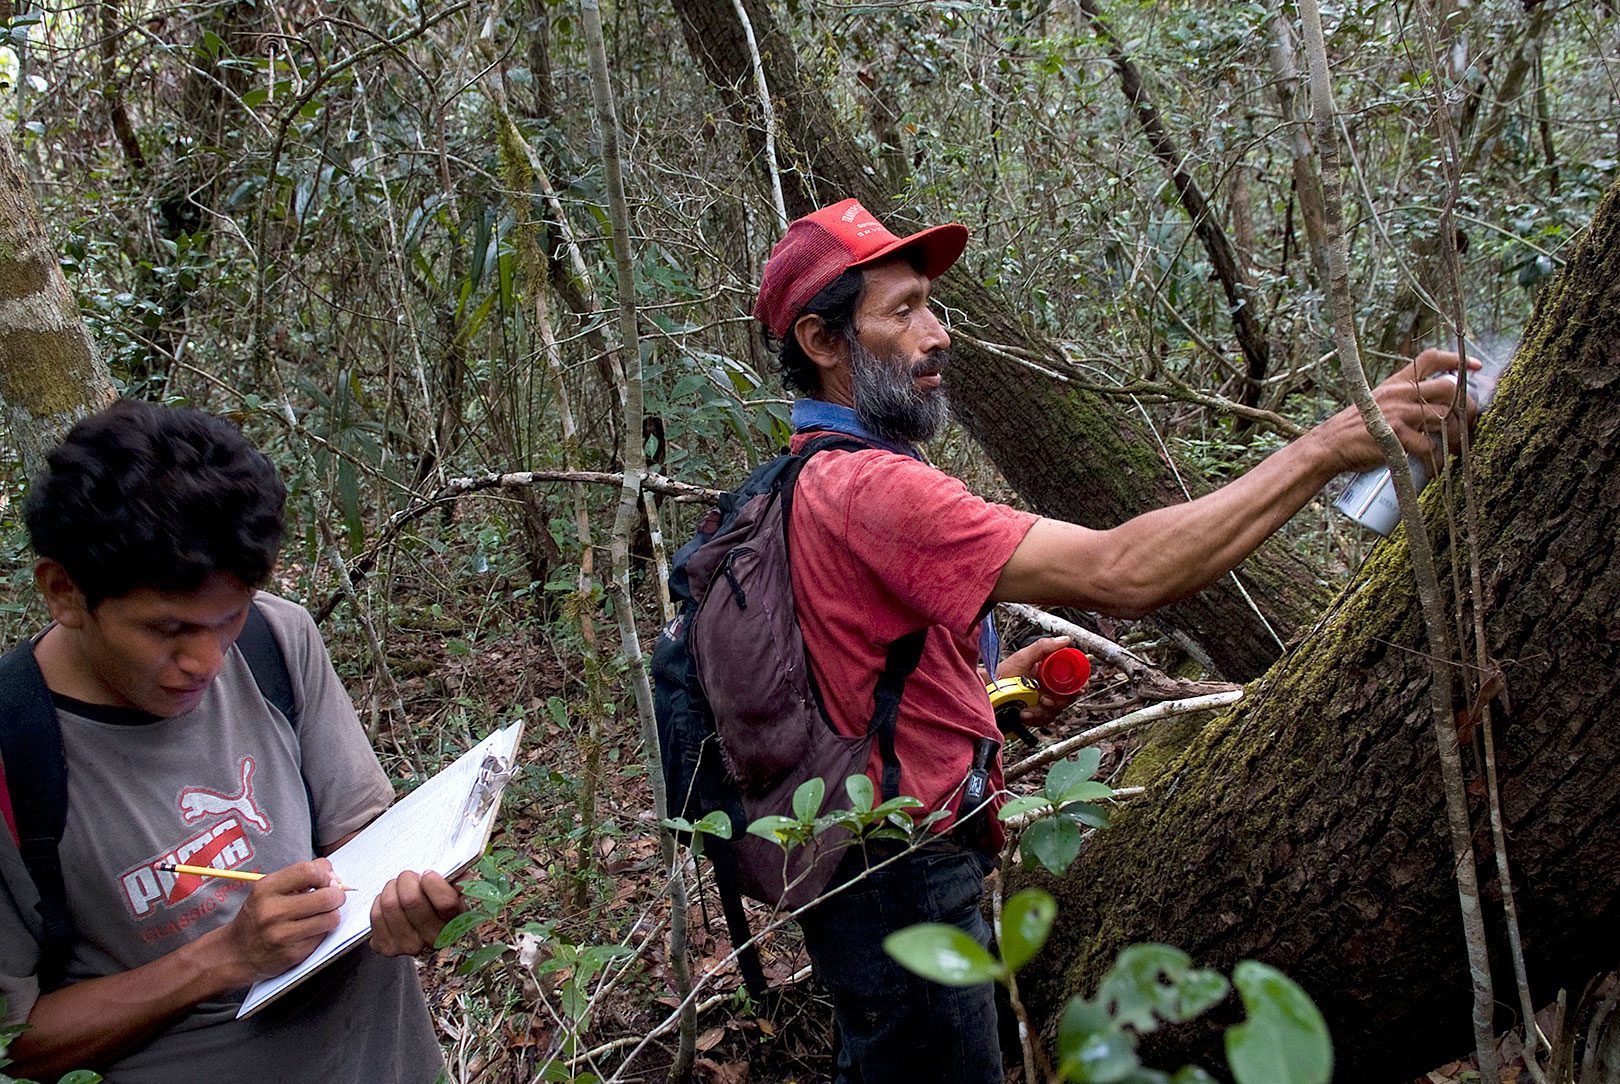 Mayan Biosphere Reserve monitors mark trees during a timber harvest survey. Photo by Ben Schilling/WCS Guatemala.